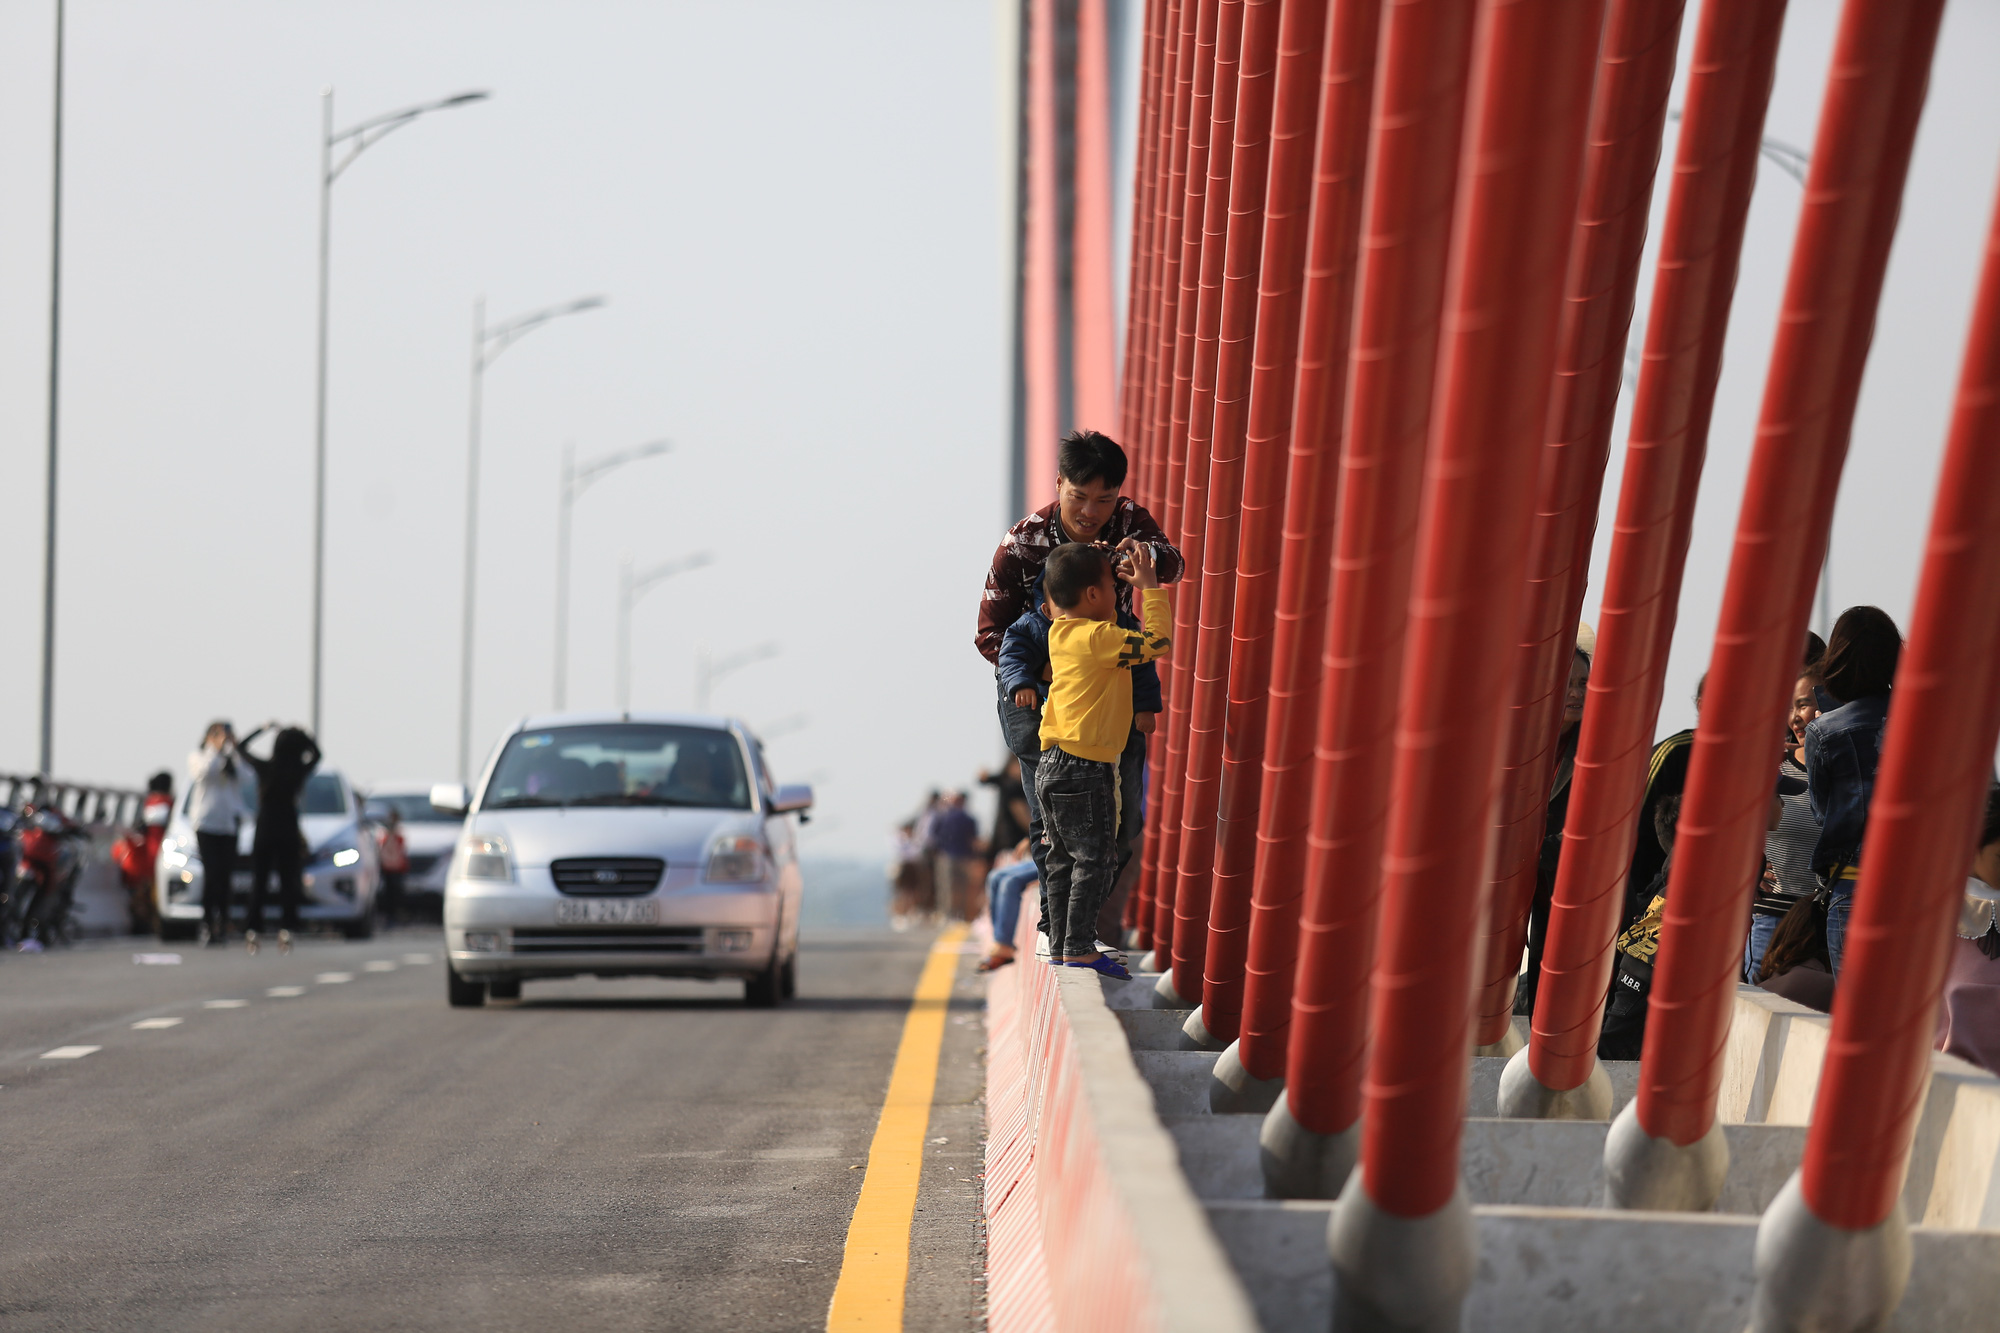 A man allows a child to climb the stayed cable on the Cua Hoi Bridge to take photos in north-central Vietnam, February 15, 2021. Photo: Ngoc Thang / Tuoi Tre